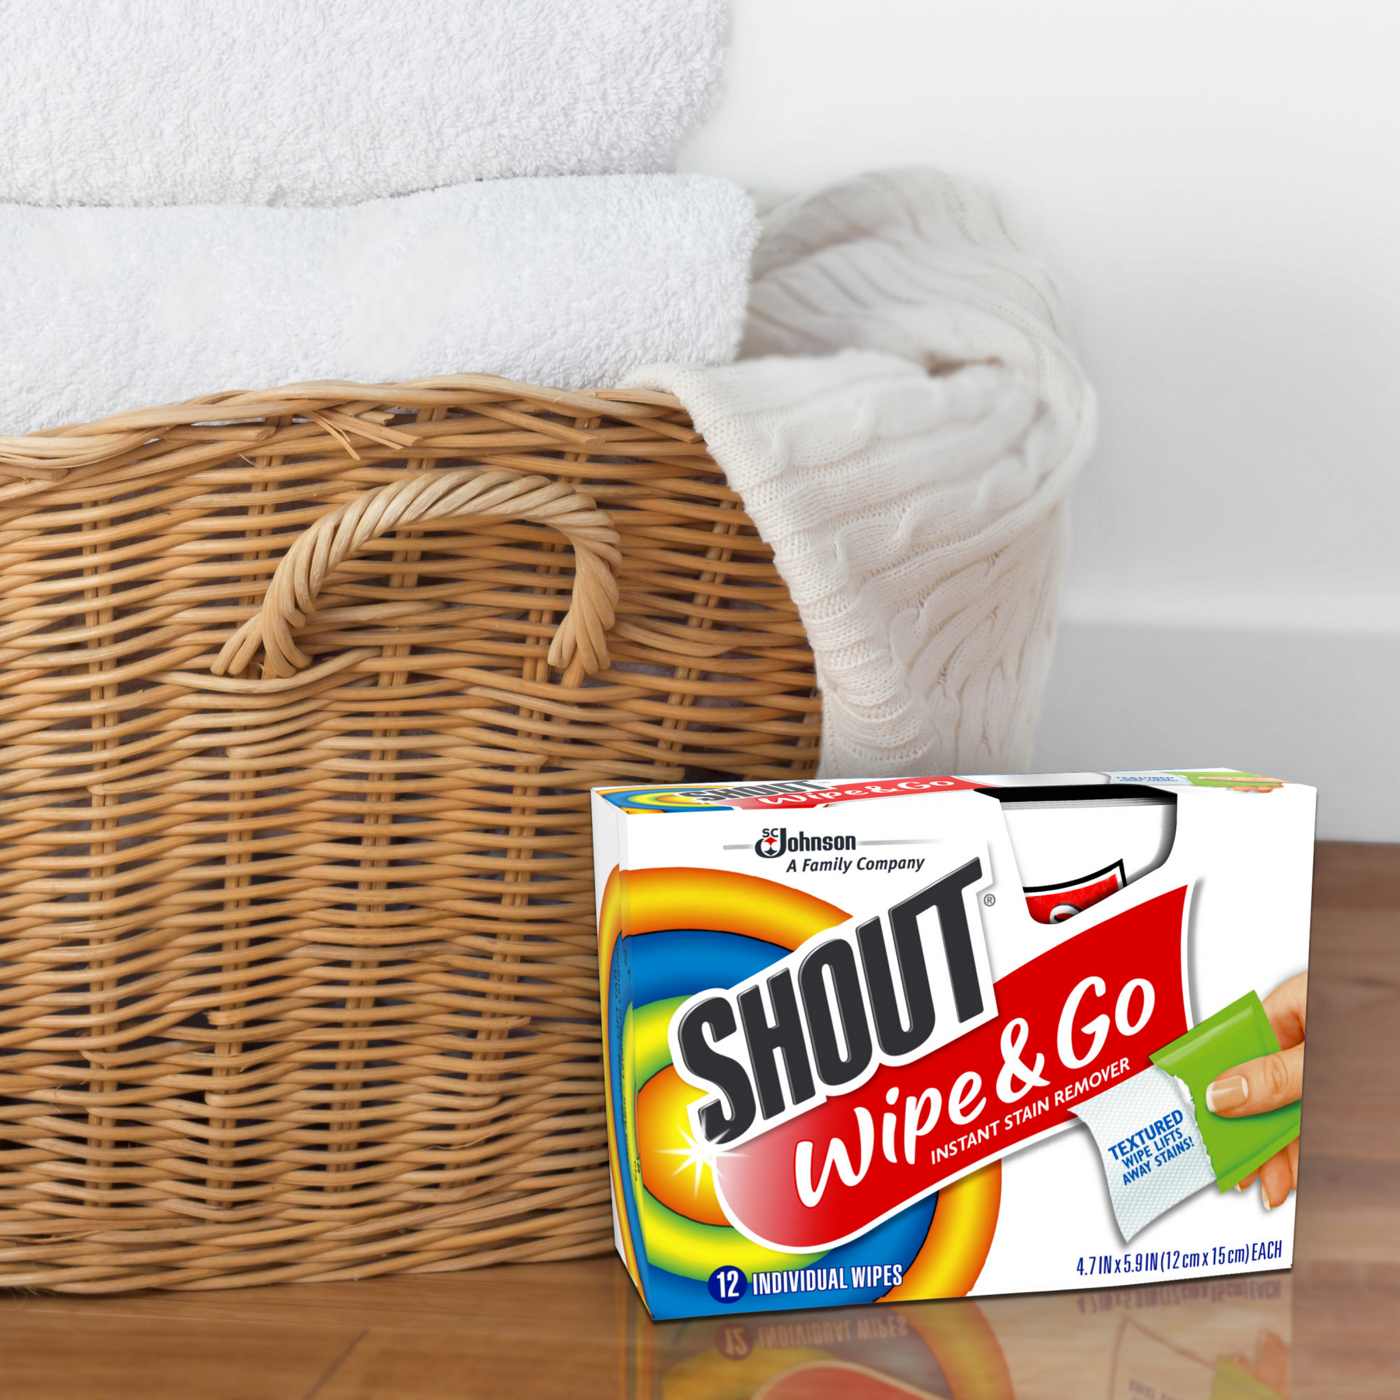 Shout Wipe & Go Instant Stain Remover Wipes; image 3 of 9